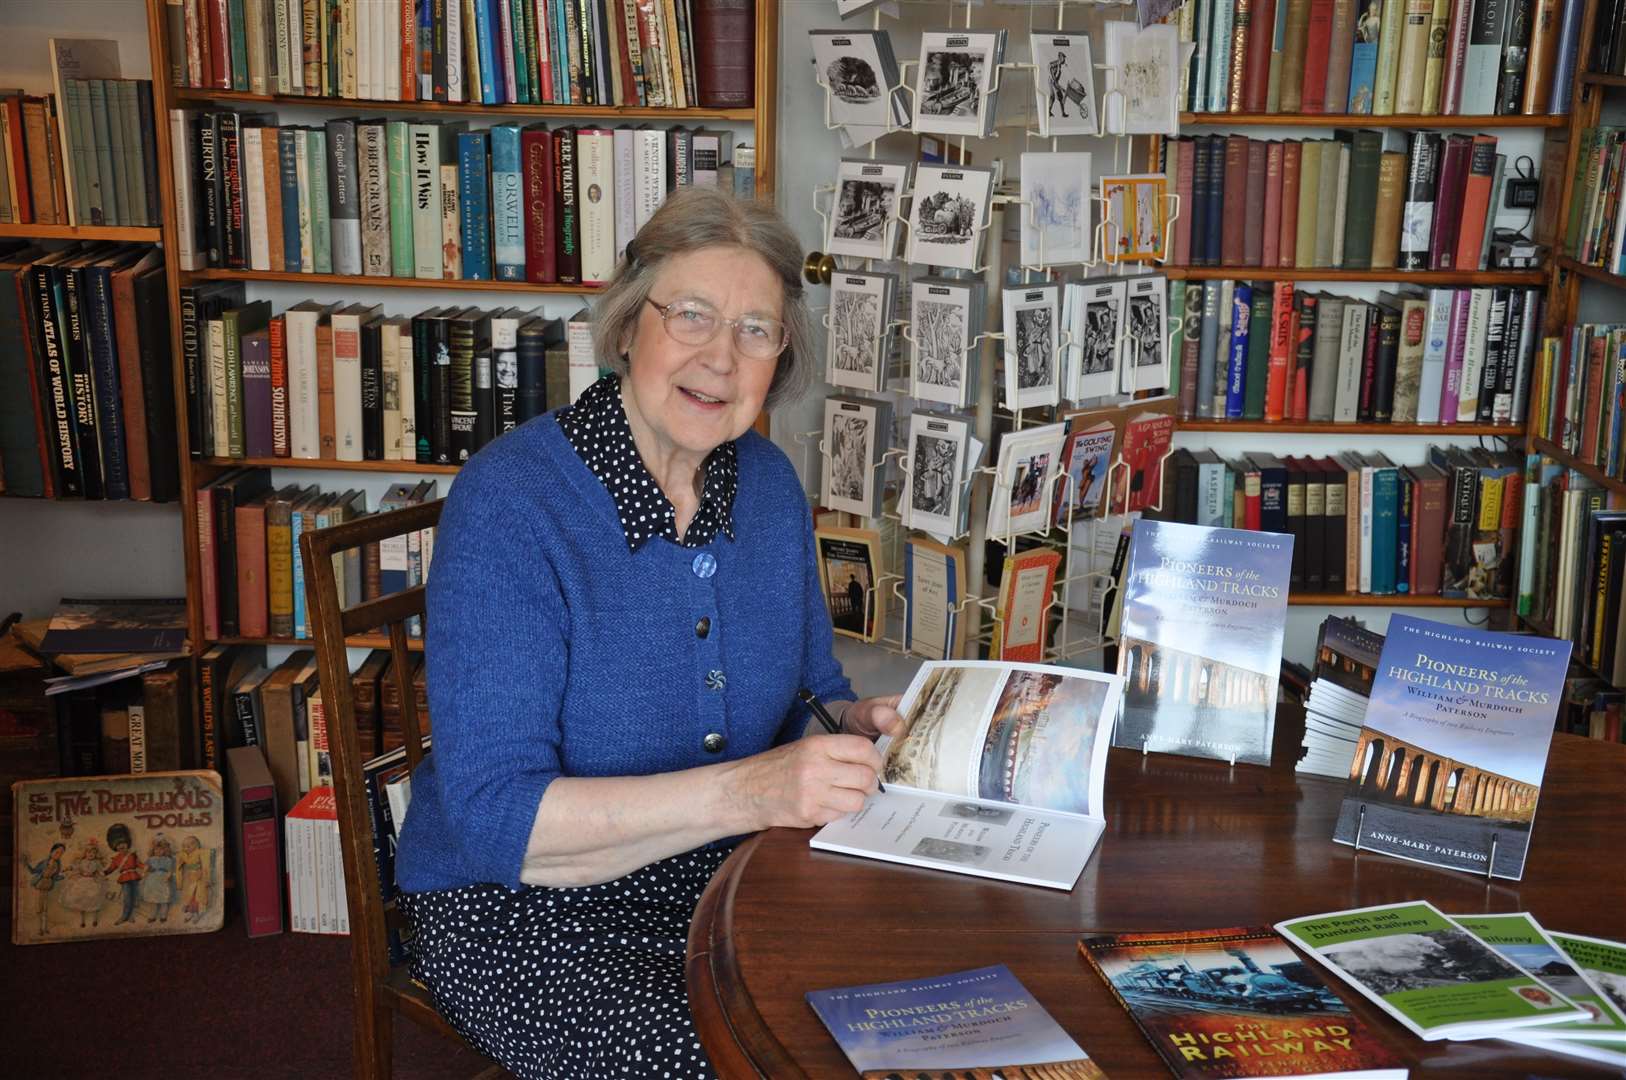 Author Anne-Mary Paterson signing one of her books.